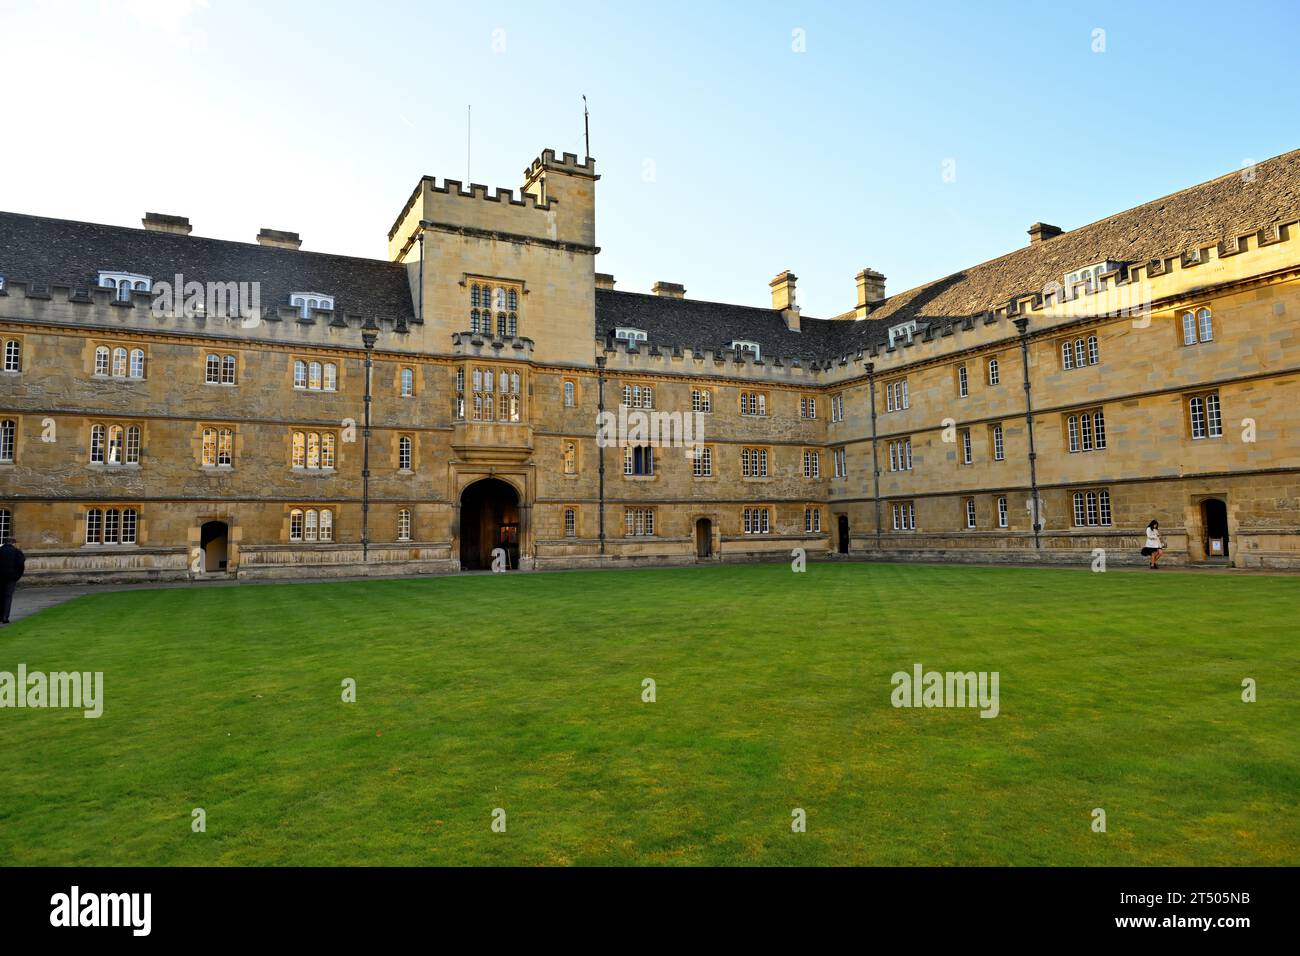 The quad and buildings of Wadham College, Oxford university, Oxford, UK Stock Photo